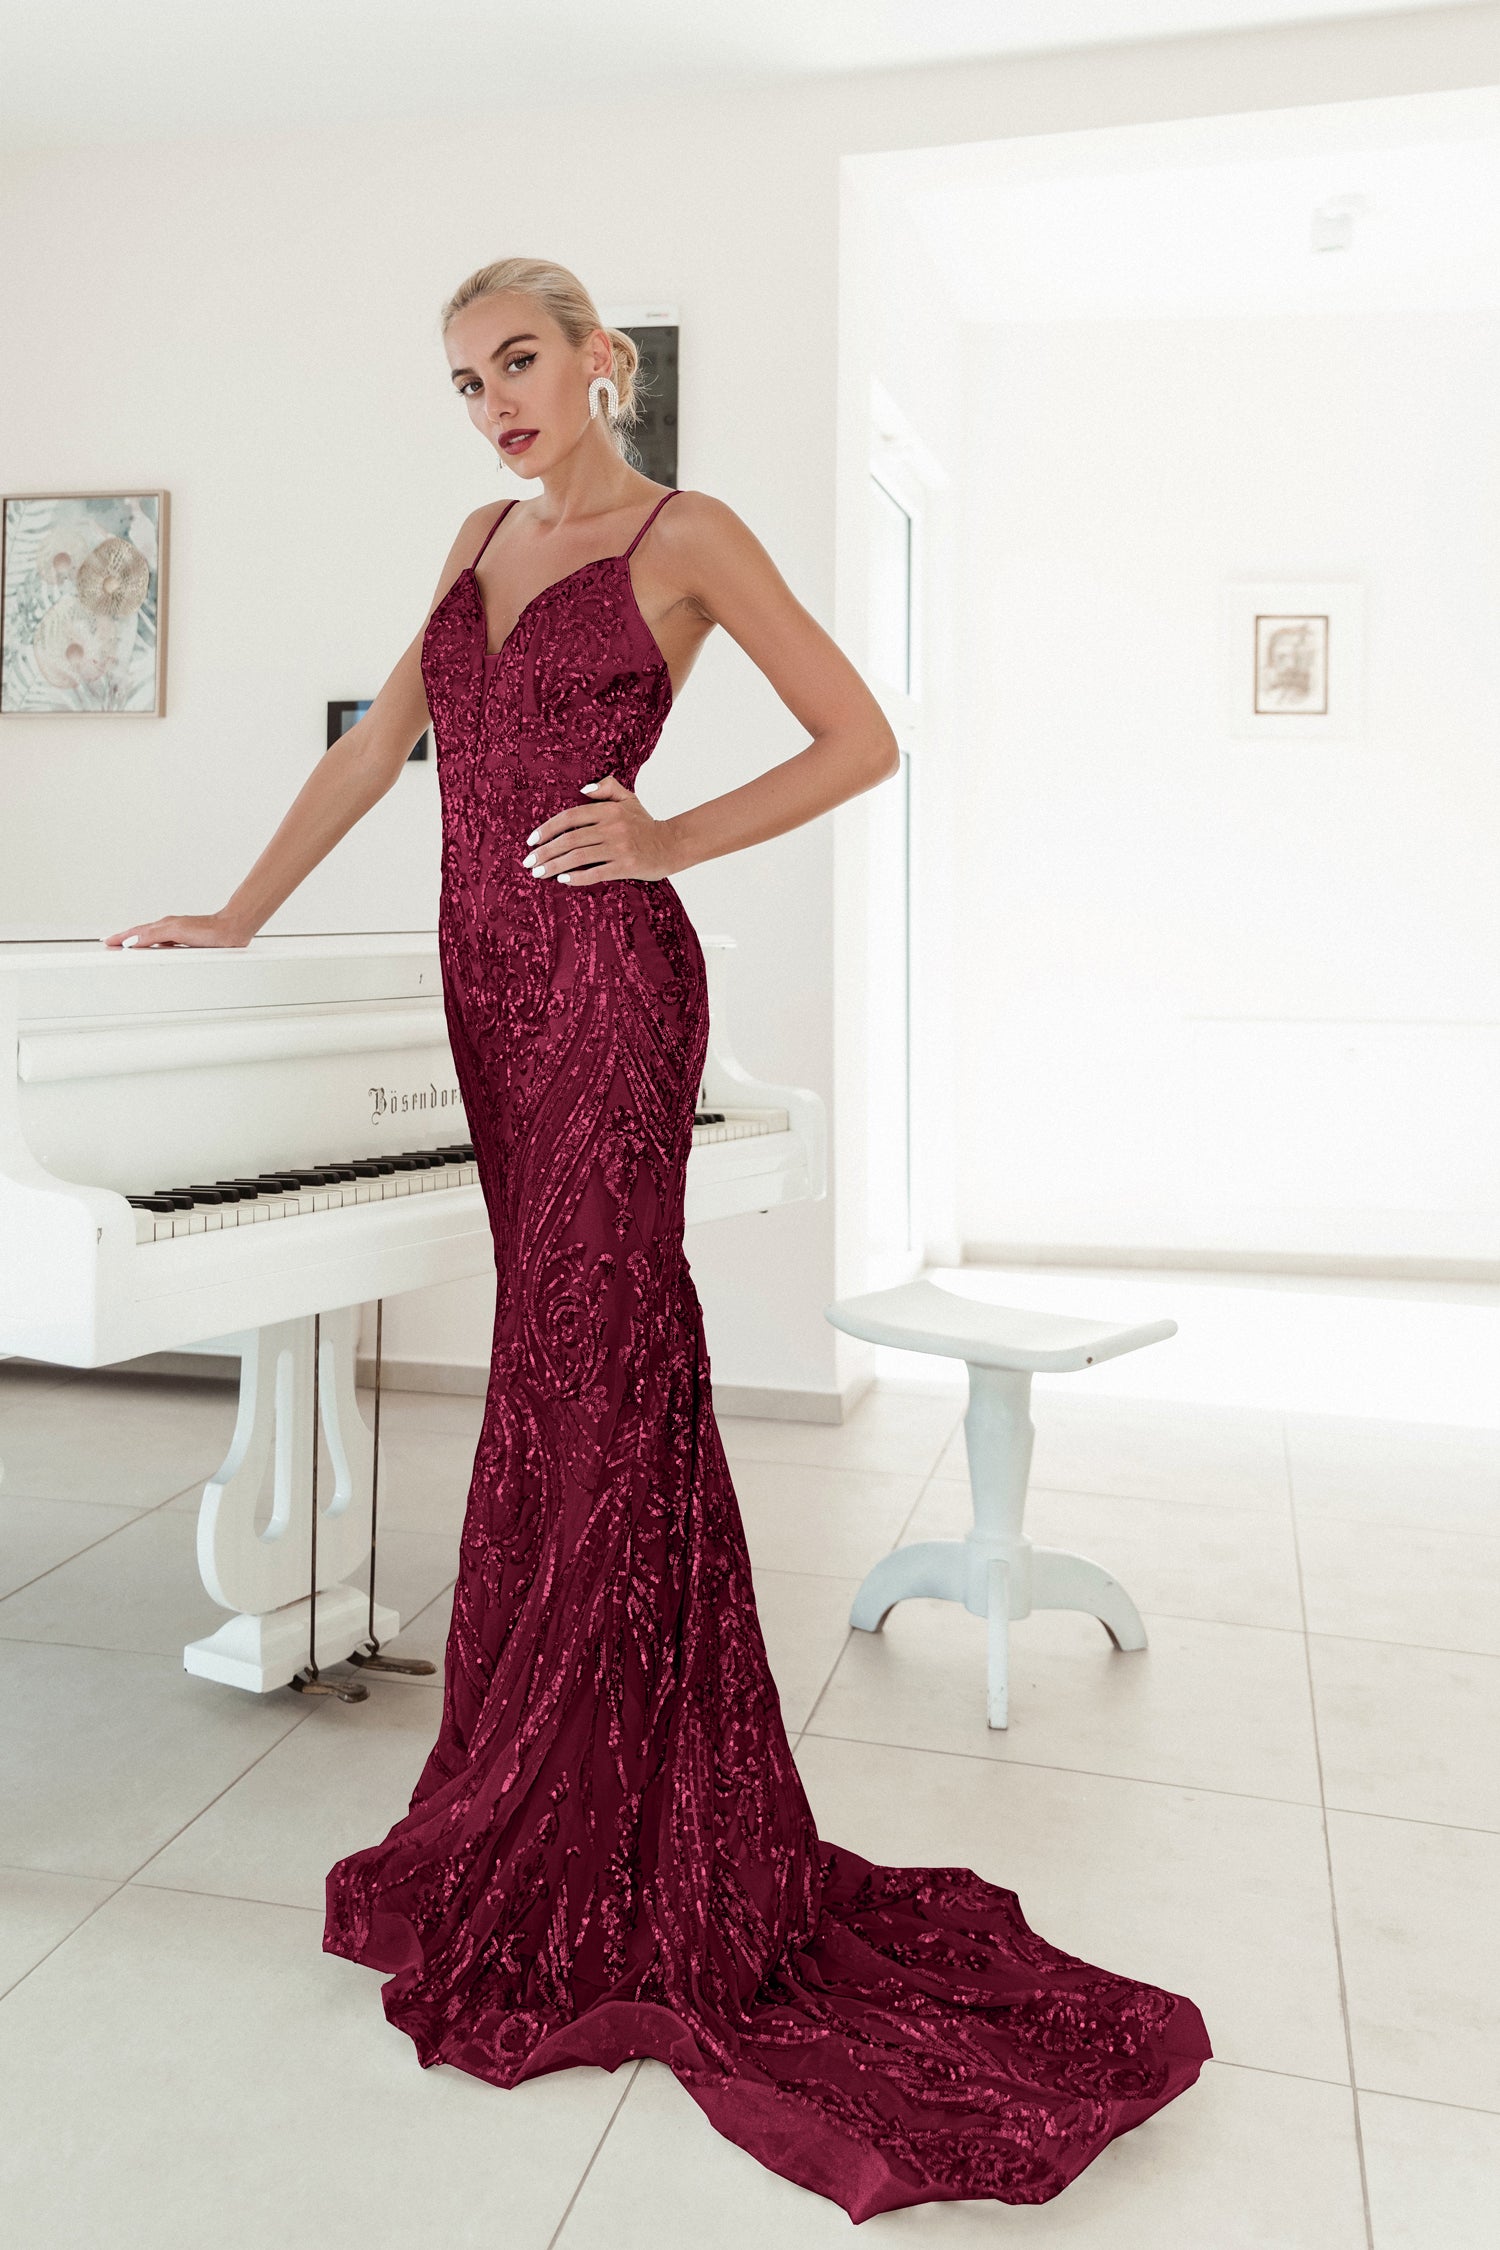 Tina Holly Couture BA666 Wine Sequin Overlay With A Deep V Neckline Mermaid Formal Dress